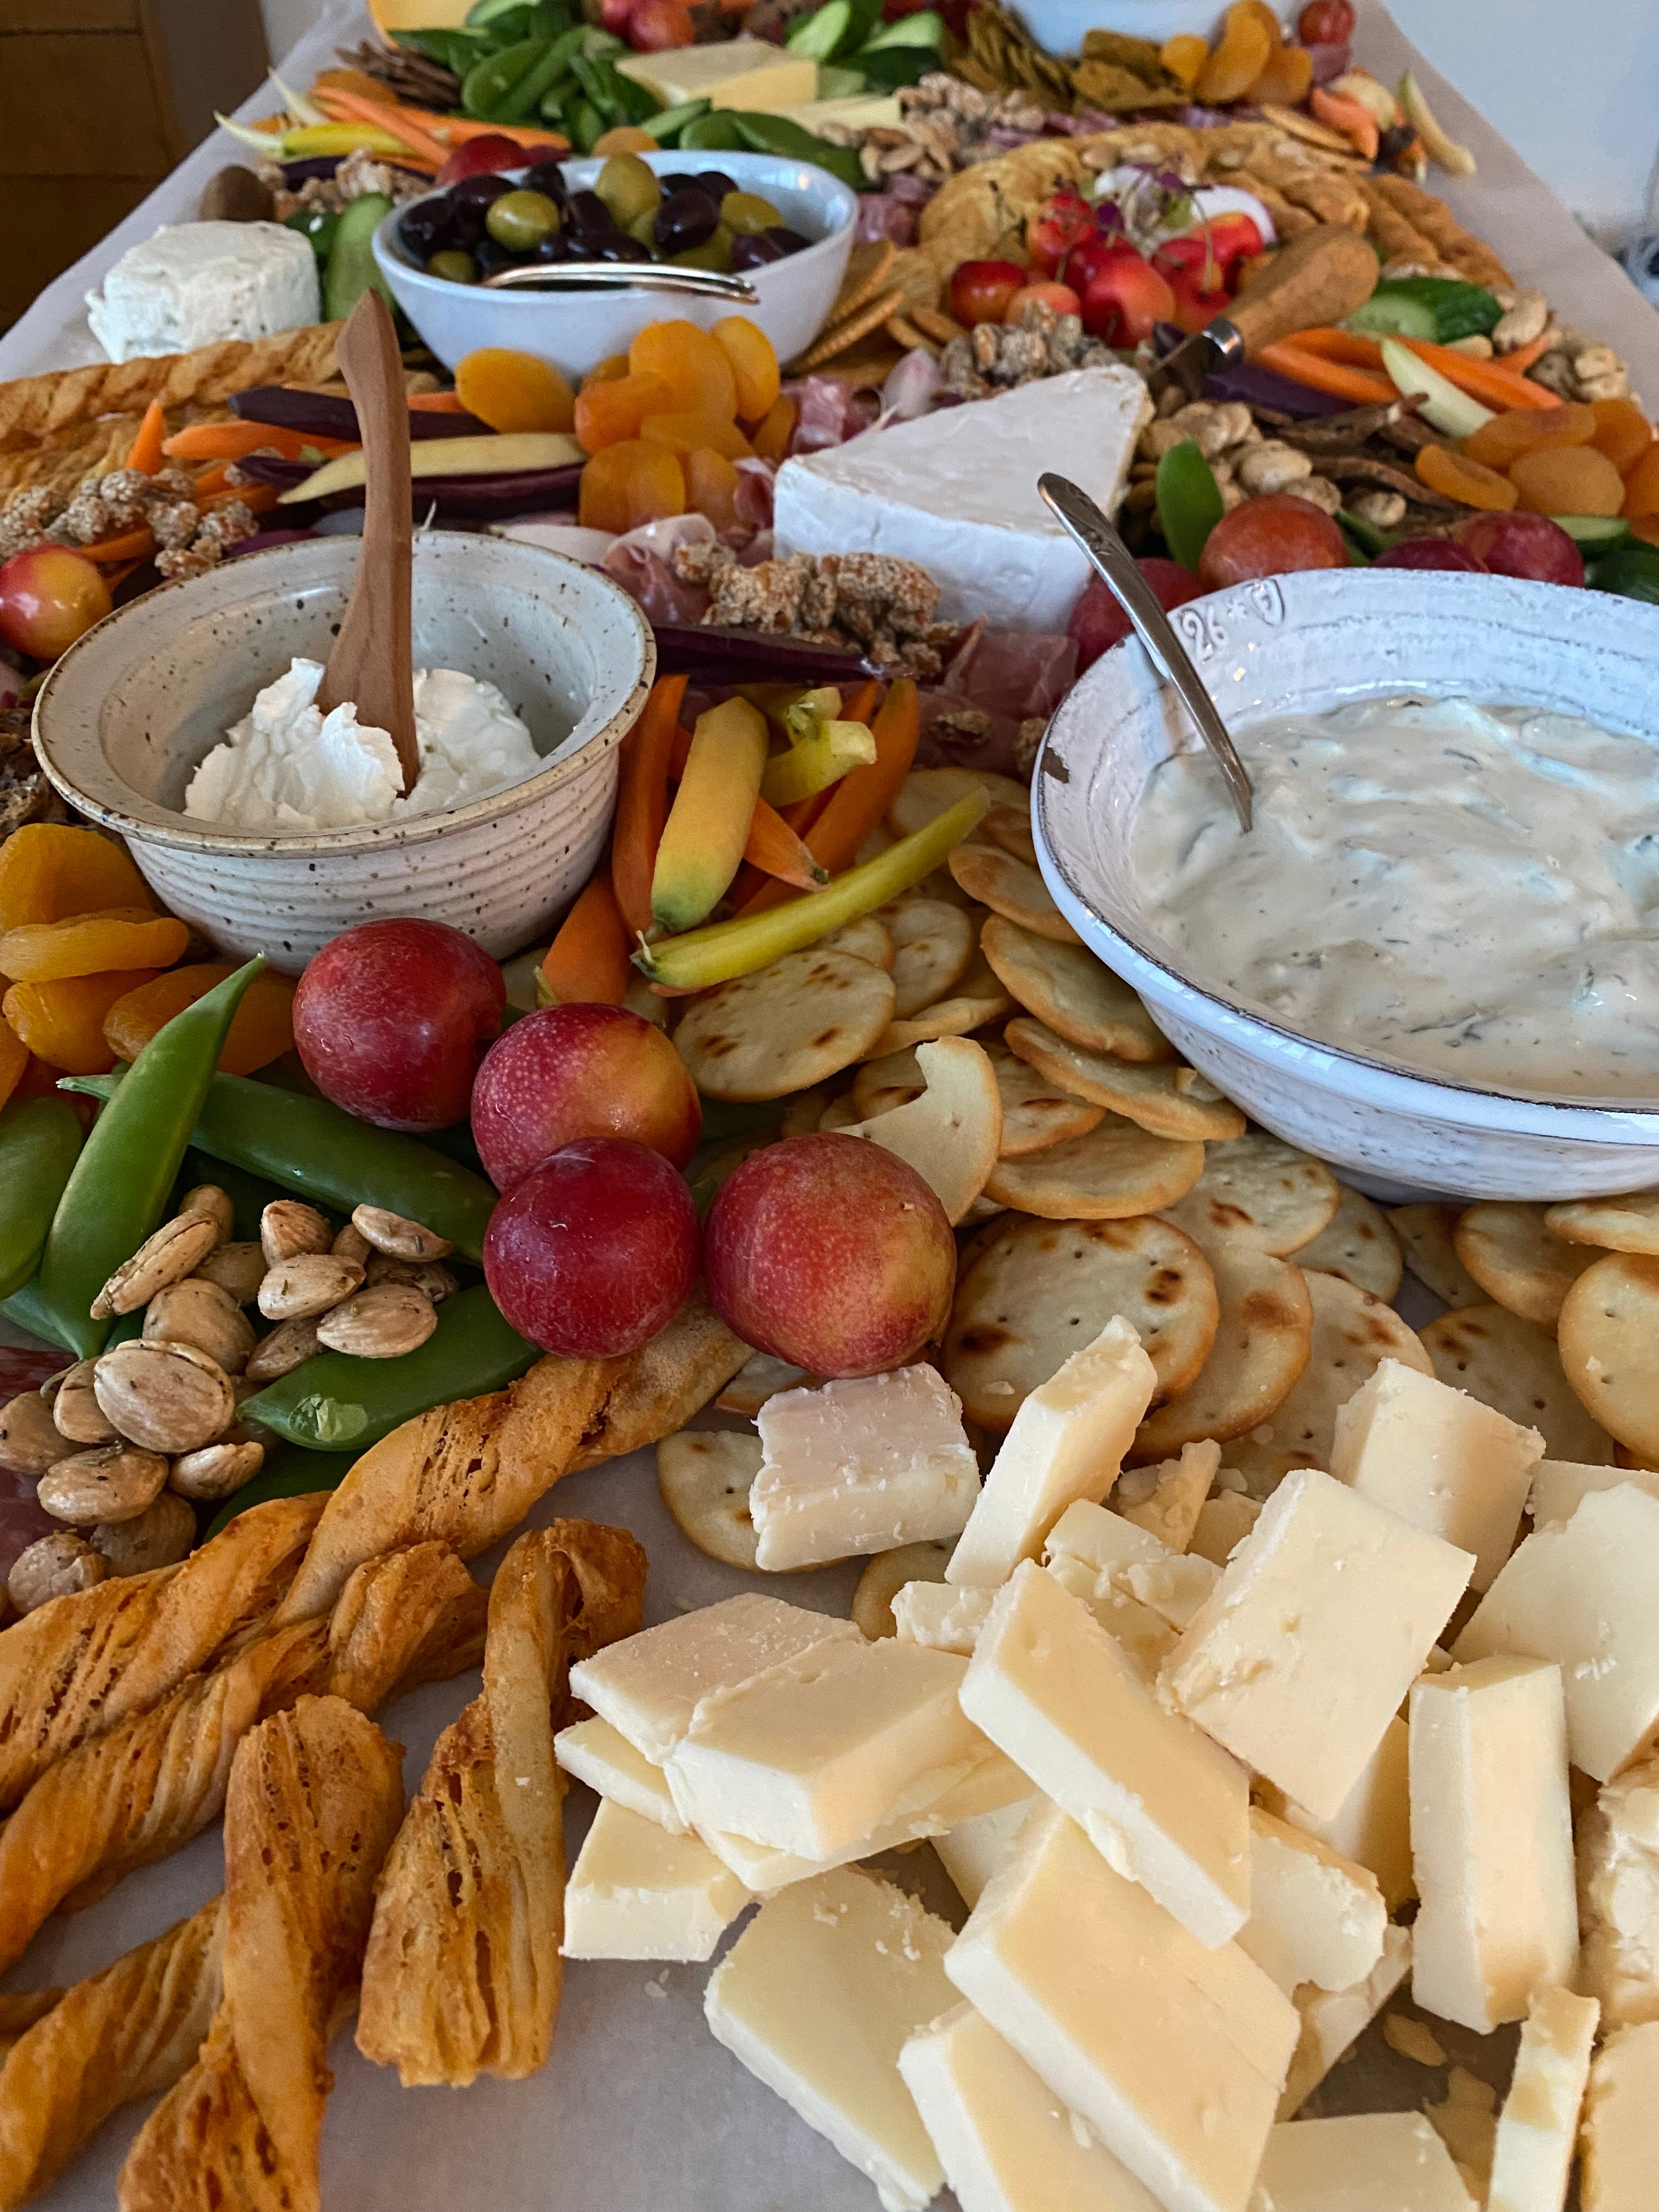 A hack for your next cheese board. - by Erica Adler